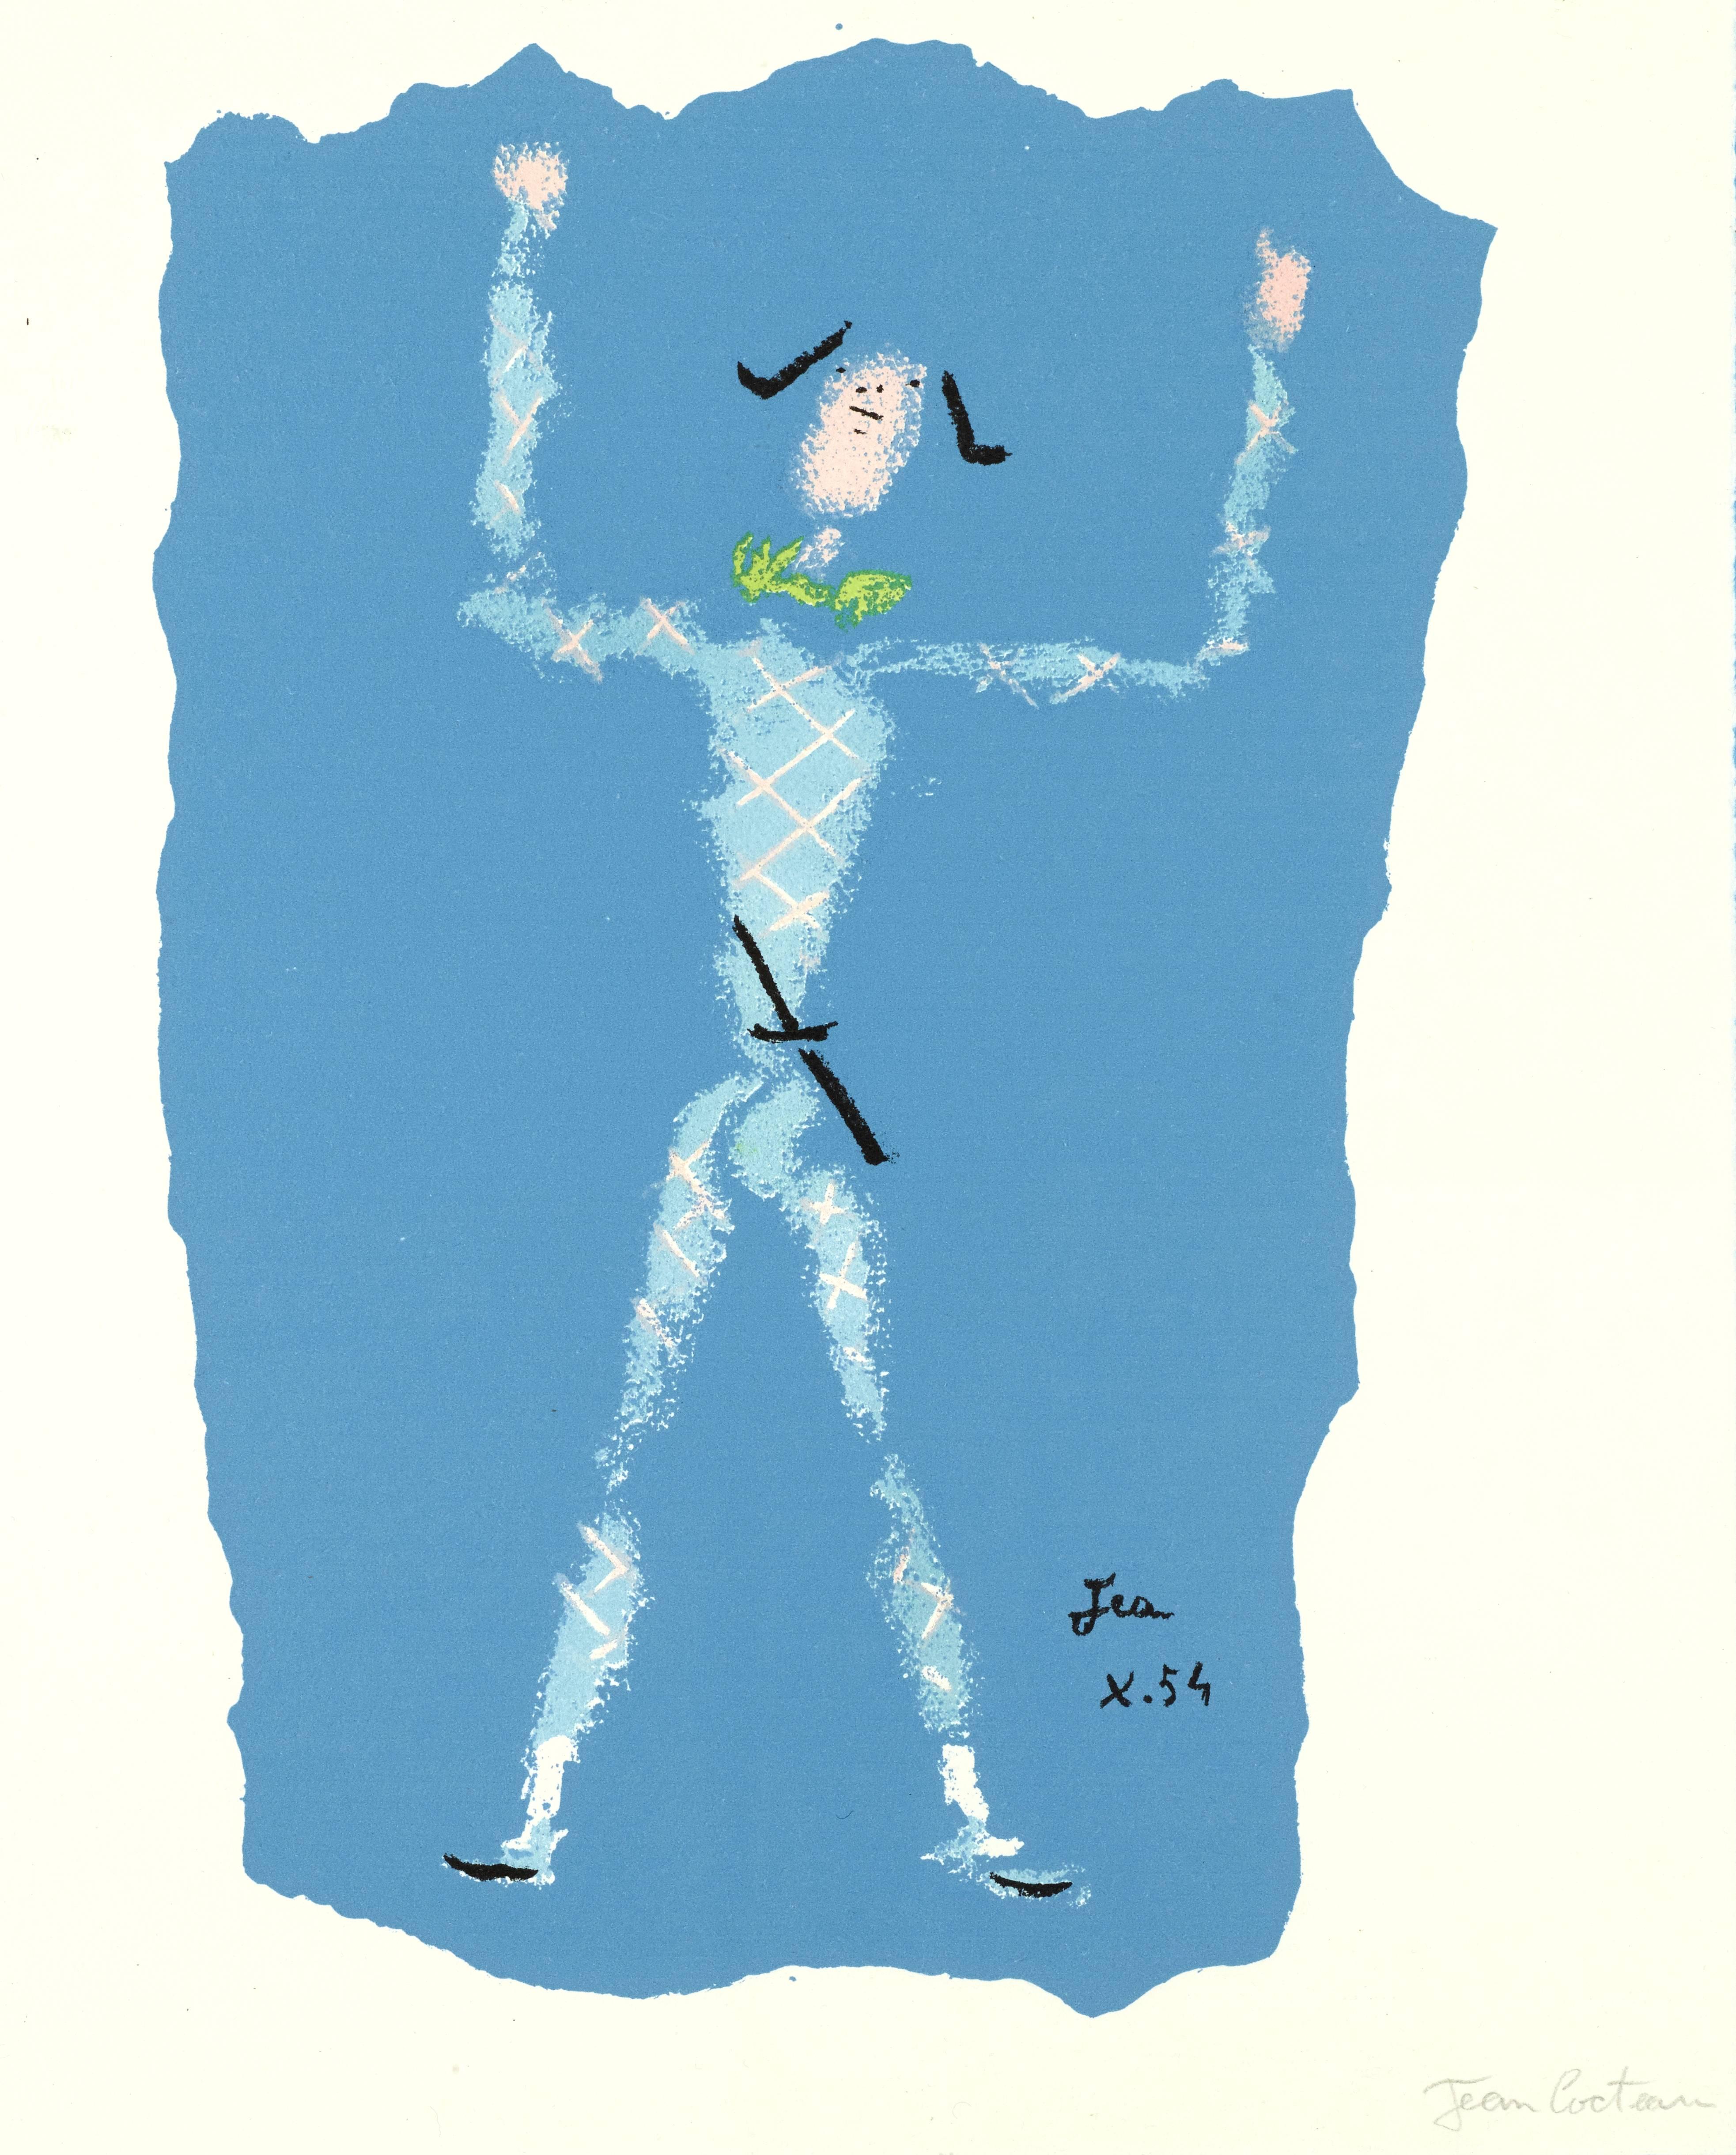 JEAN COCTEAU (1889-1963)
Under the Fire Coat V
1954
Handsigned Lithograph
Joseph Forêt Editeur, Paris
Dimensions: 41 x 33 cm

Jean Cocteau

Writer, artist and film director Jean Cocteau was one of the most influential creative figures in the